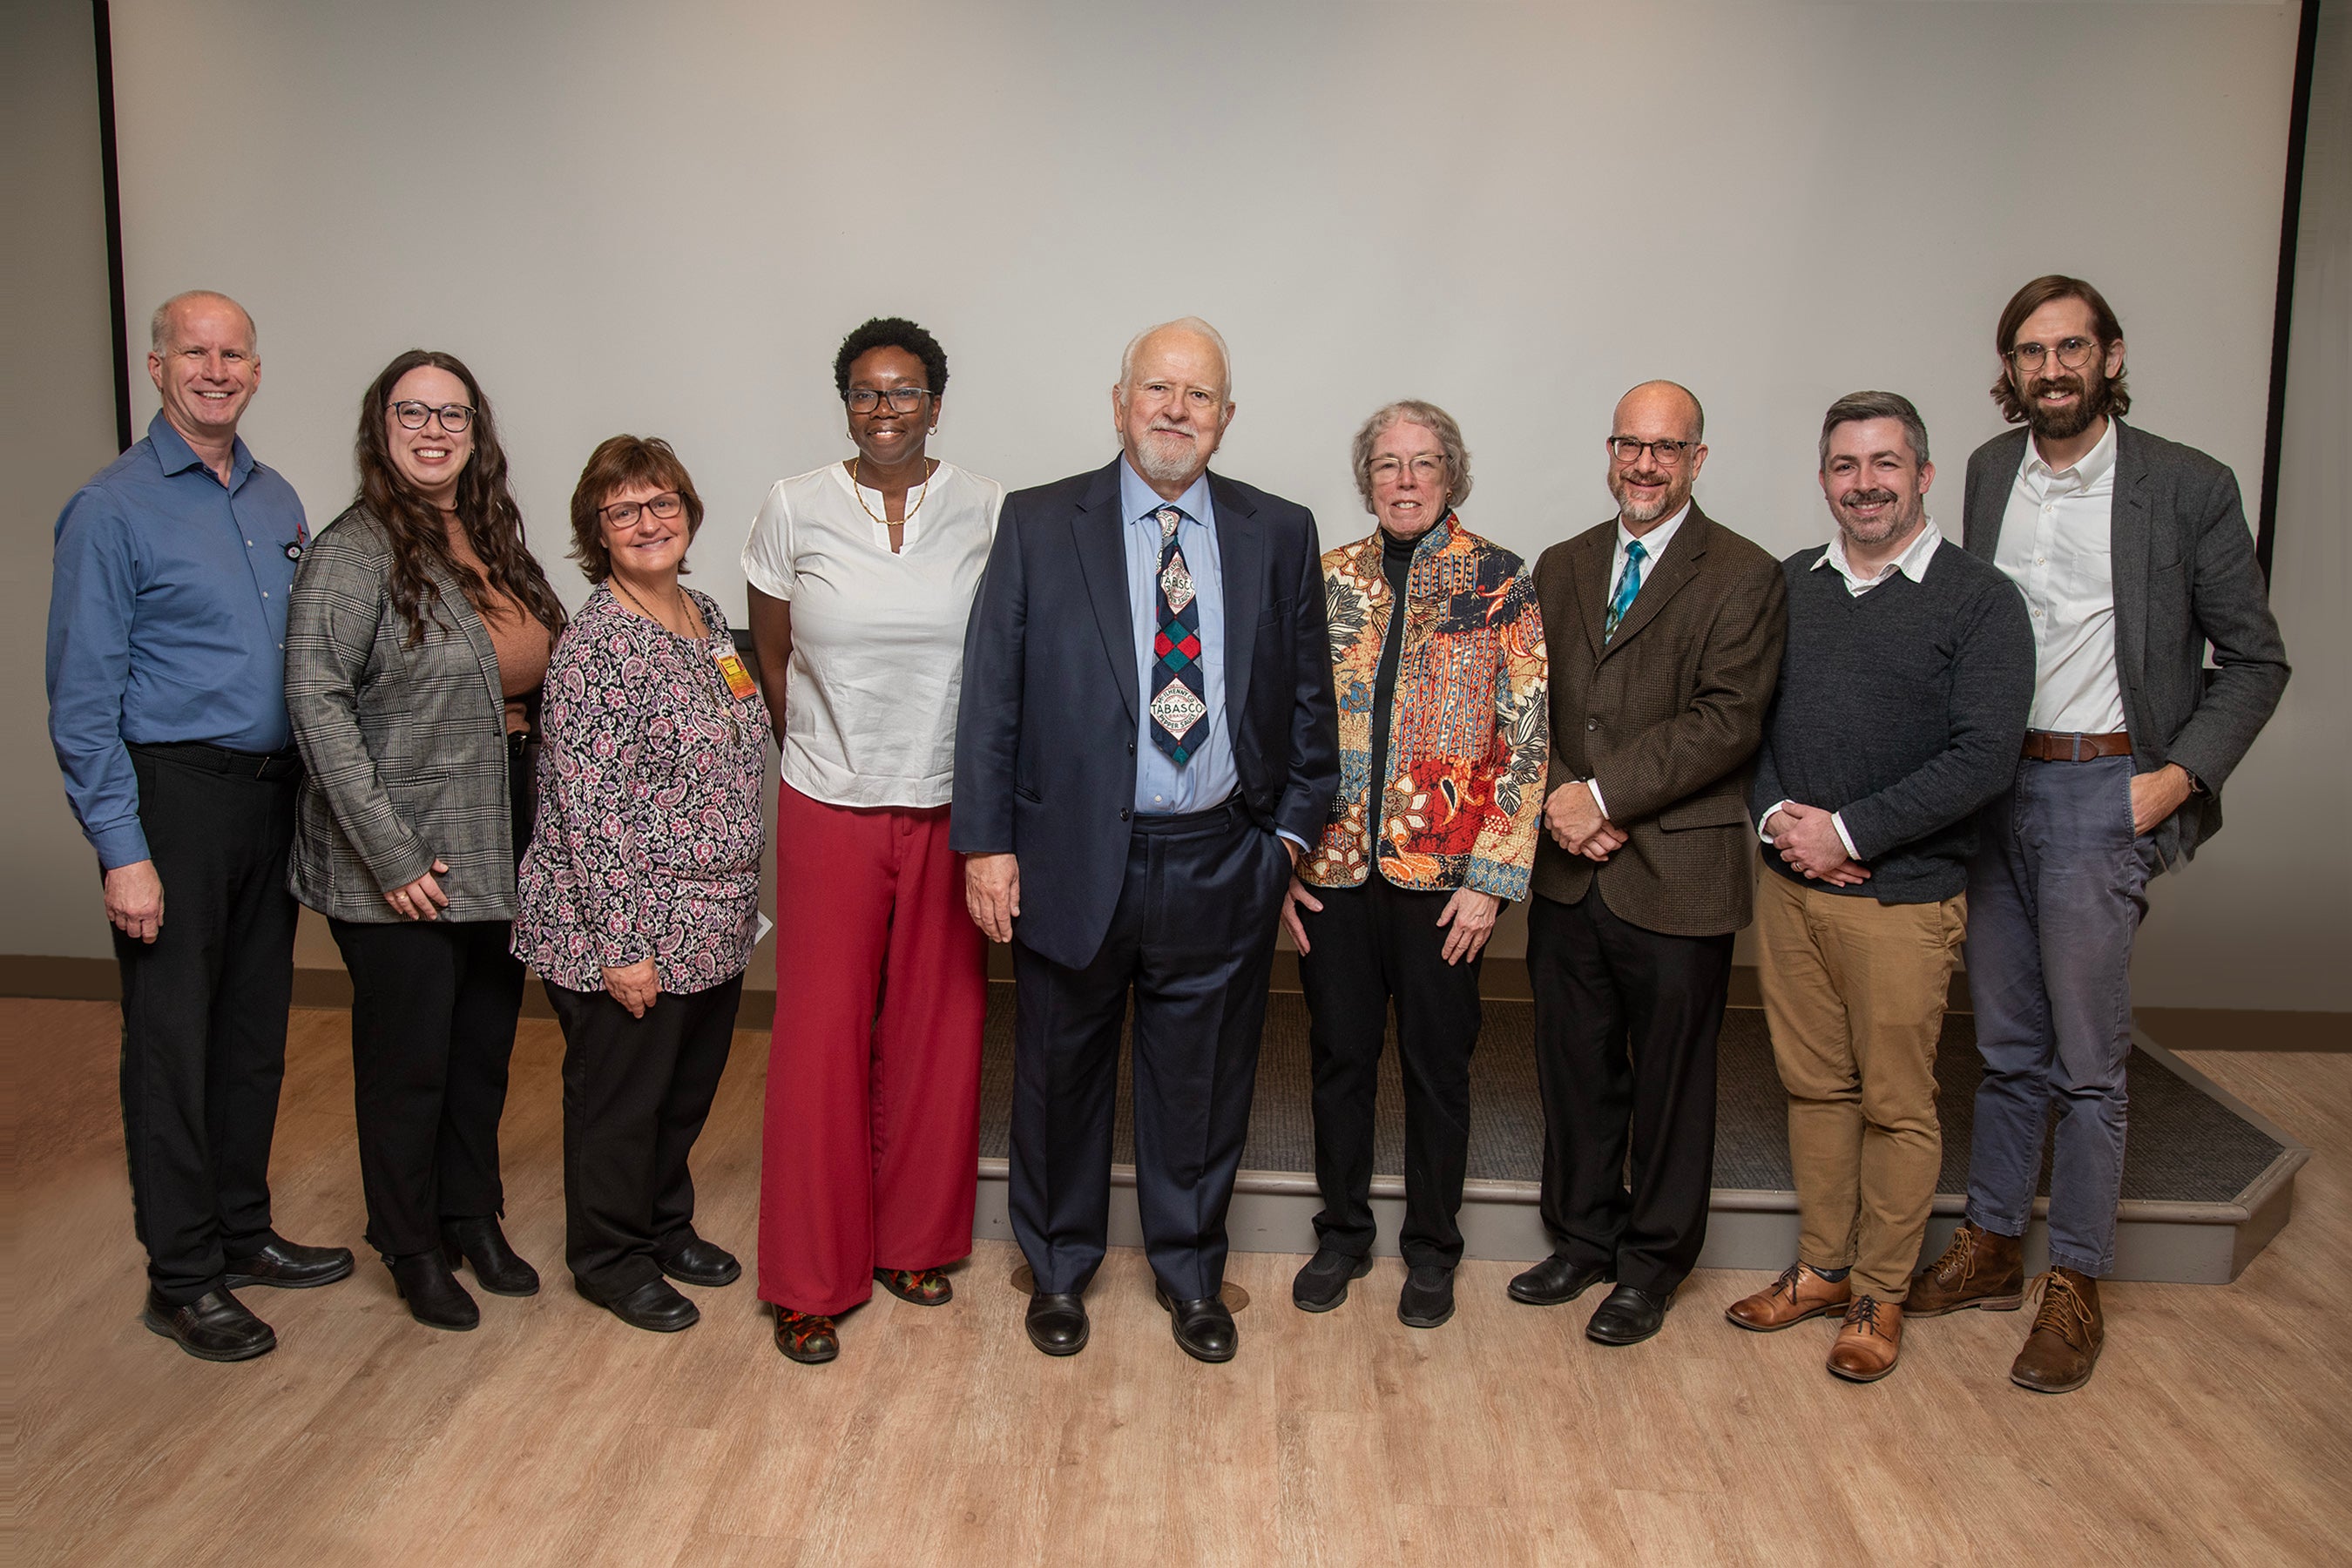 UH/CWRU Center for Clinical Ethics members